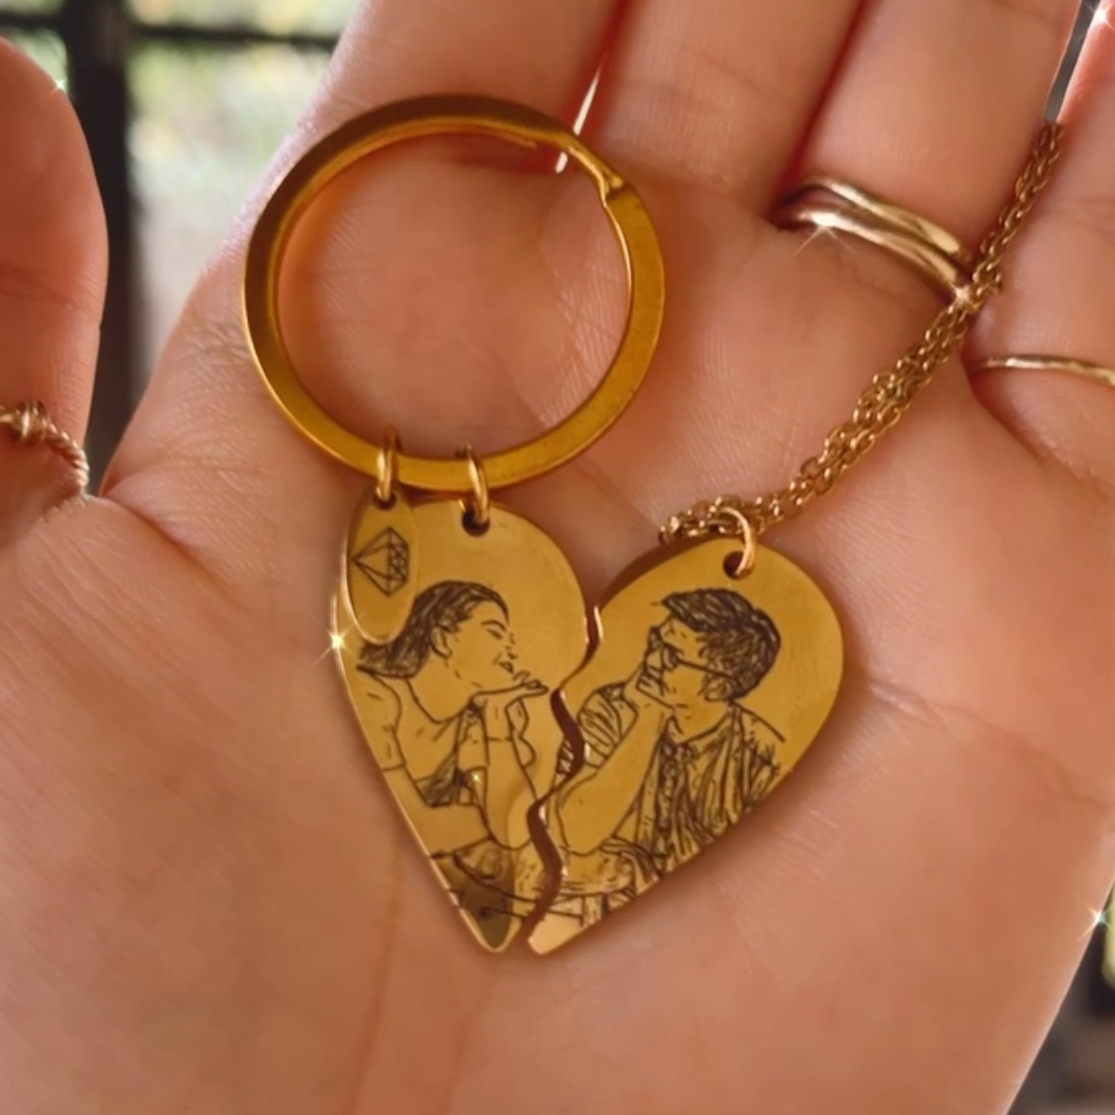 PRE-ORDER Lazer Engraved Piece of My Heart Necklace / Keychain - LINE ART